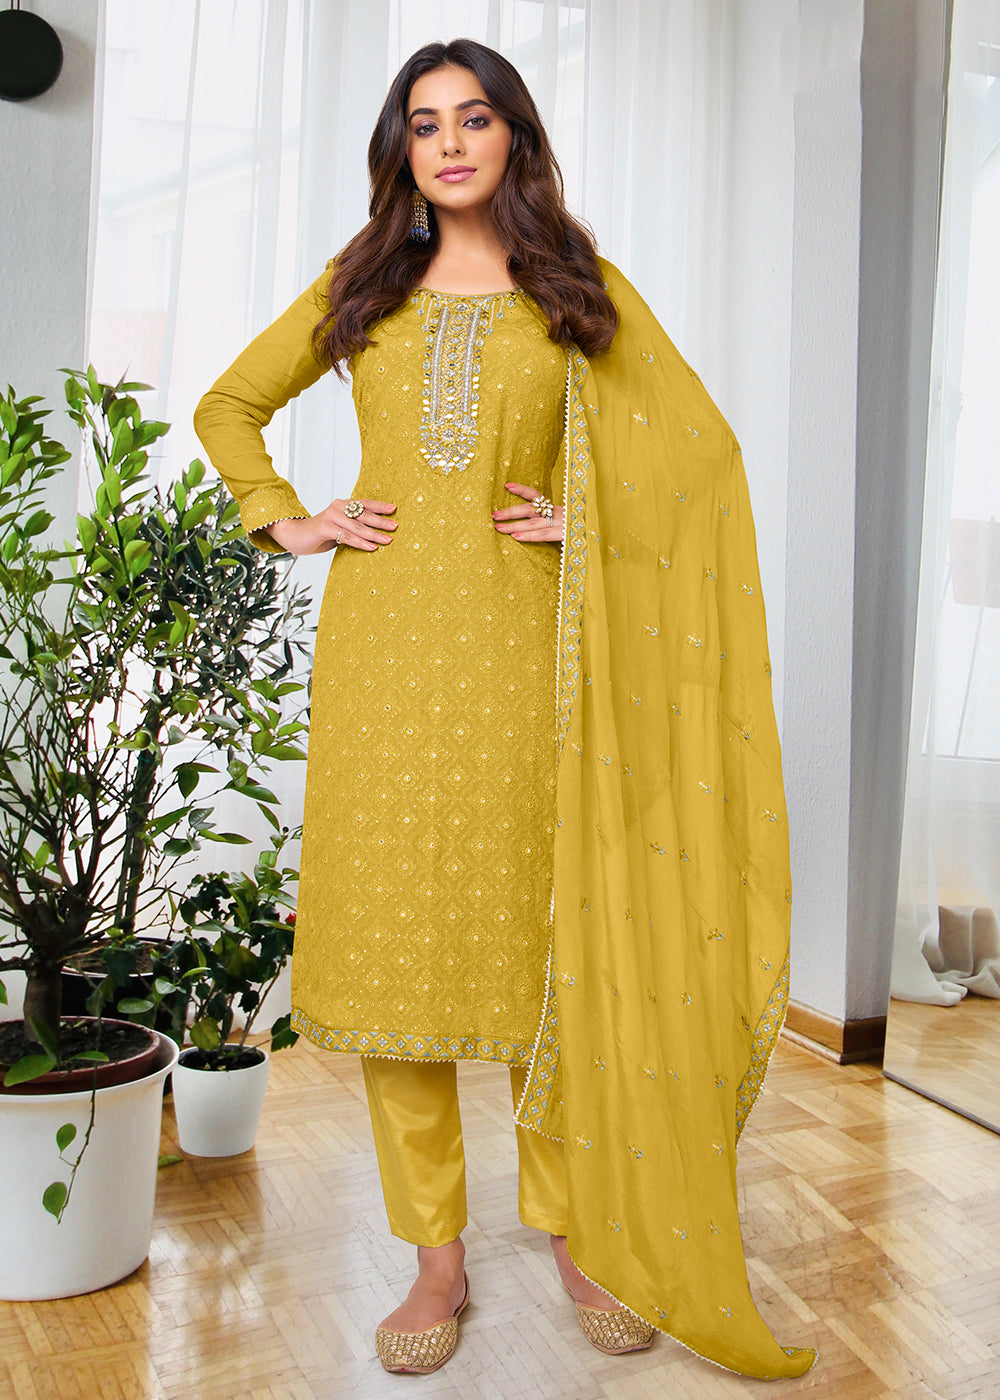 Buy Now Pretty Sunny Mustard Beautifully Embroidered Trendy Salwar Kameez Online in USA, UK, Canada, Germany, Australia & Worldwide at Empress Clothing. 